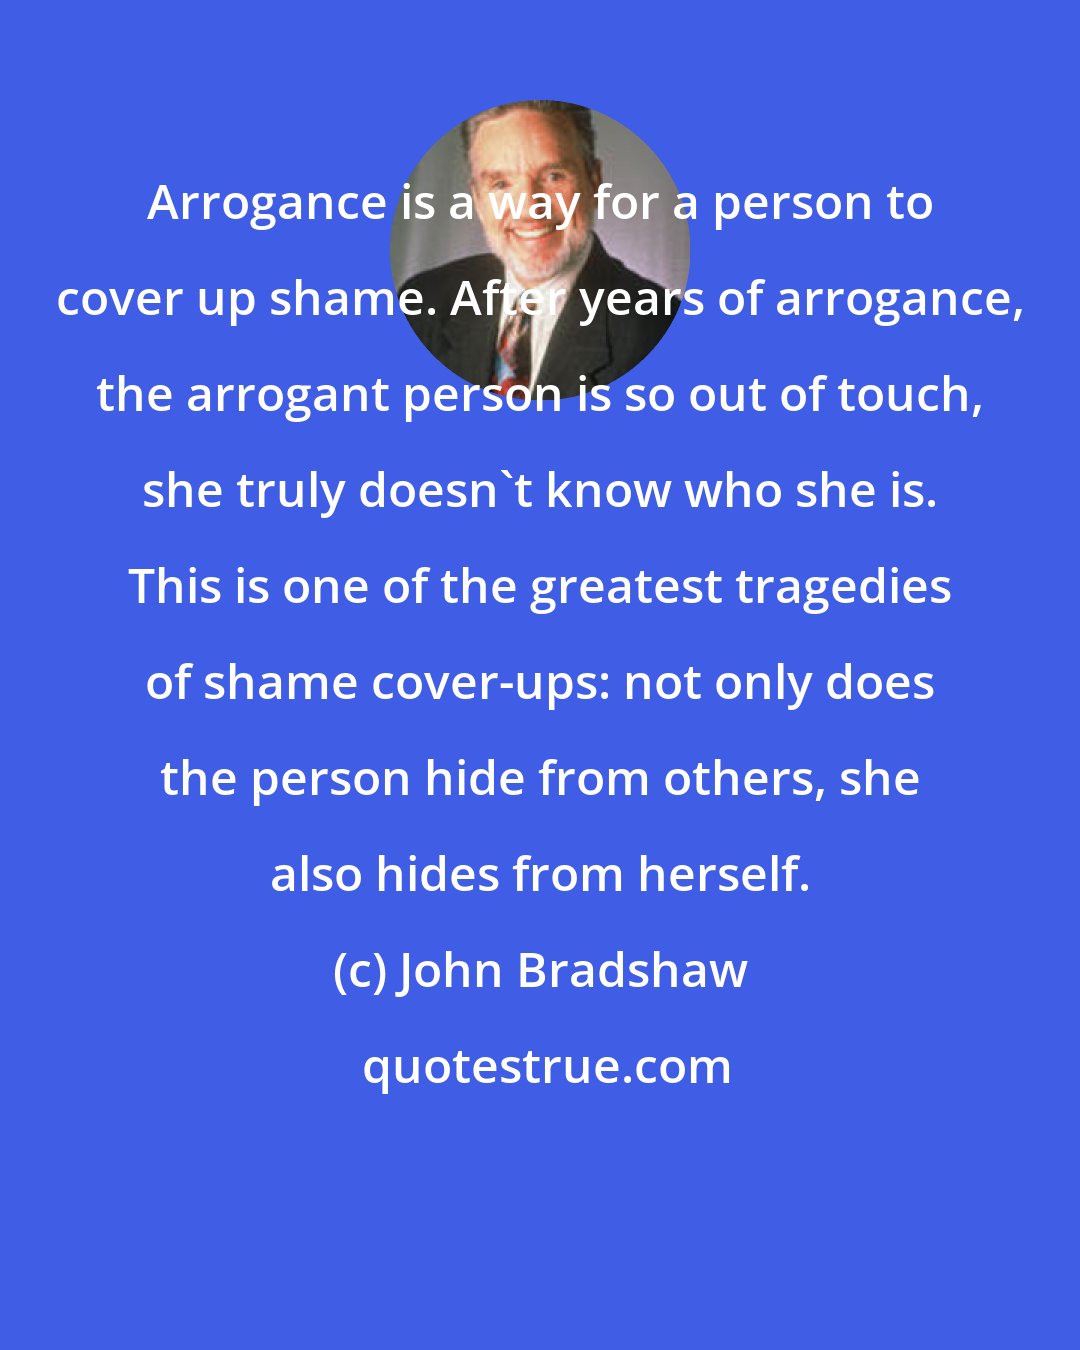 John Bradshaw: Arrogance is a way for a person to cover up shame. After years of arrogance, the arrogant person is so out of touch, she truly doesn't know who she is. This is one of the greatest tragedies of shame cover-ups: not only does the person hide from others, she also hides from herself.